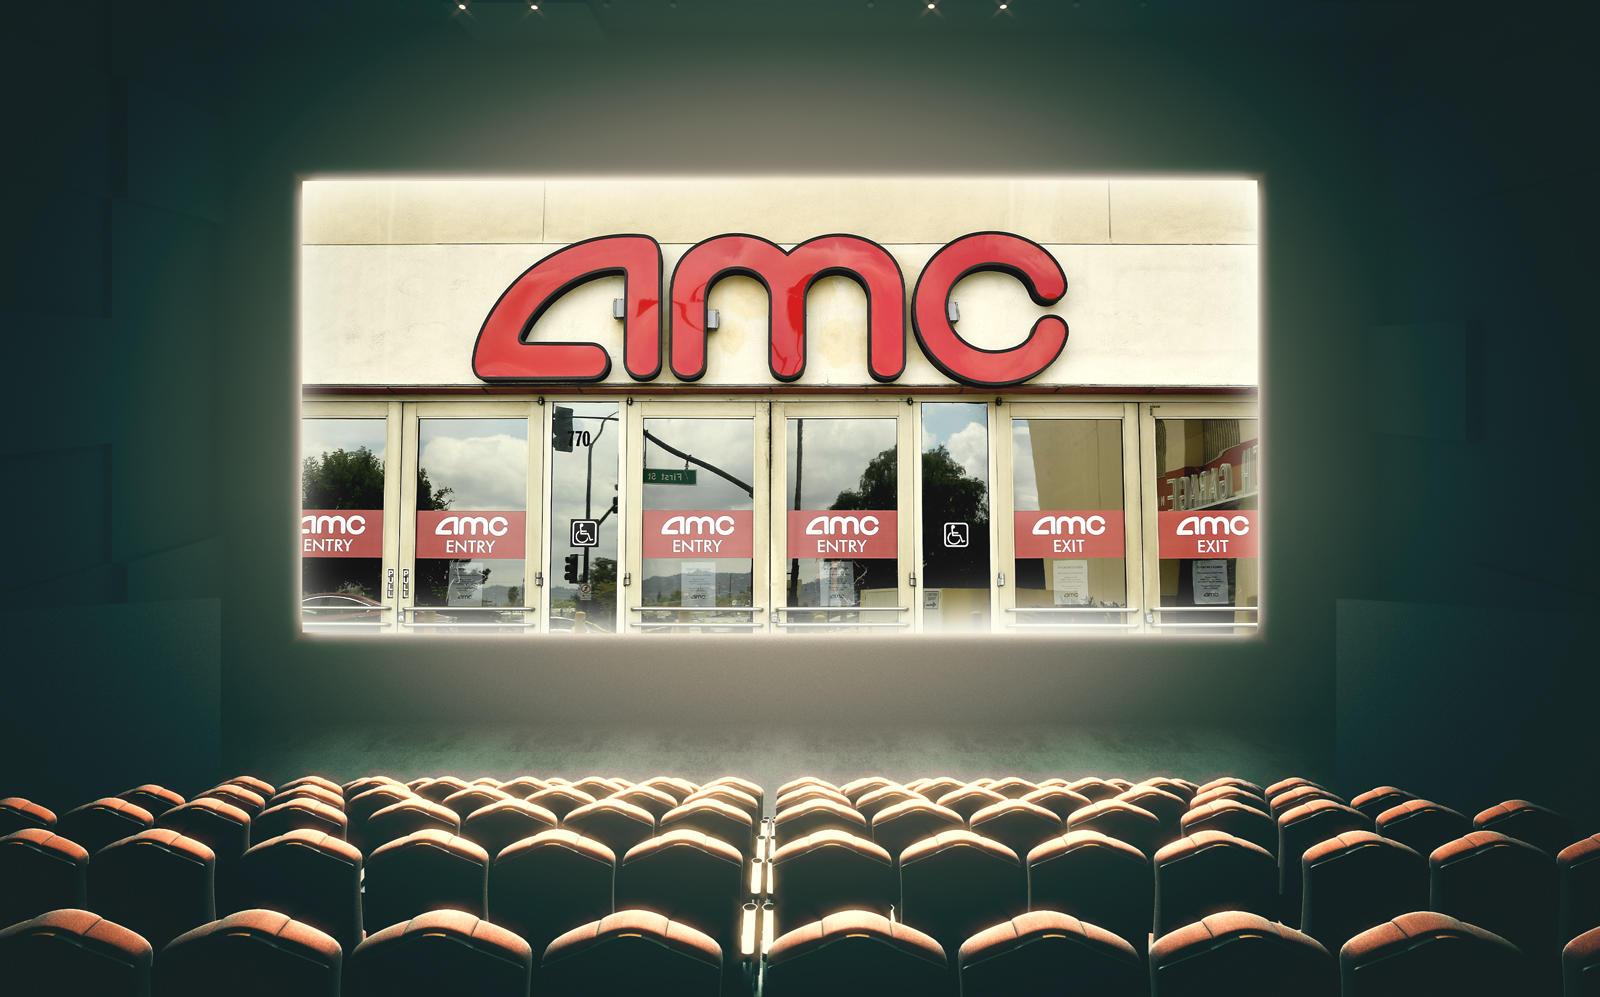 The financing deal comes after AMC theaters have been shuttered for months due to the coronavirus pandemic. (iStock)